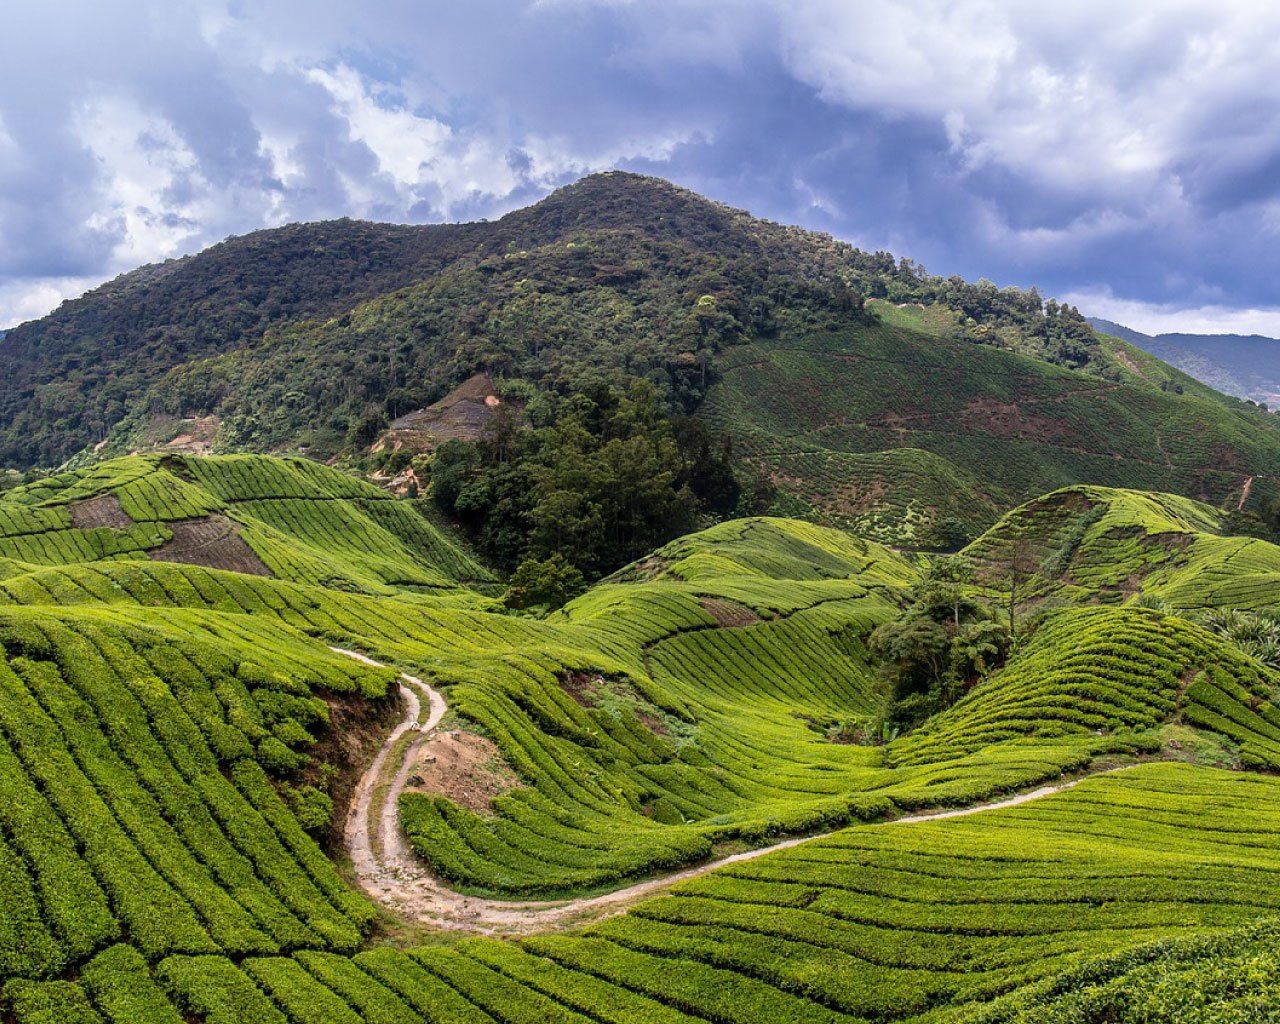 Cameron Highlands: 20 Must Do Things For First Timers